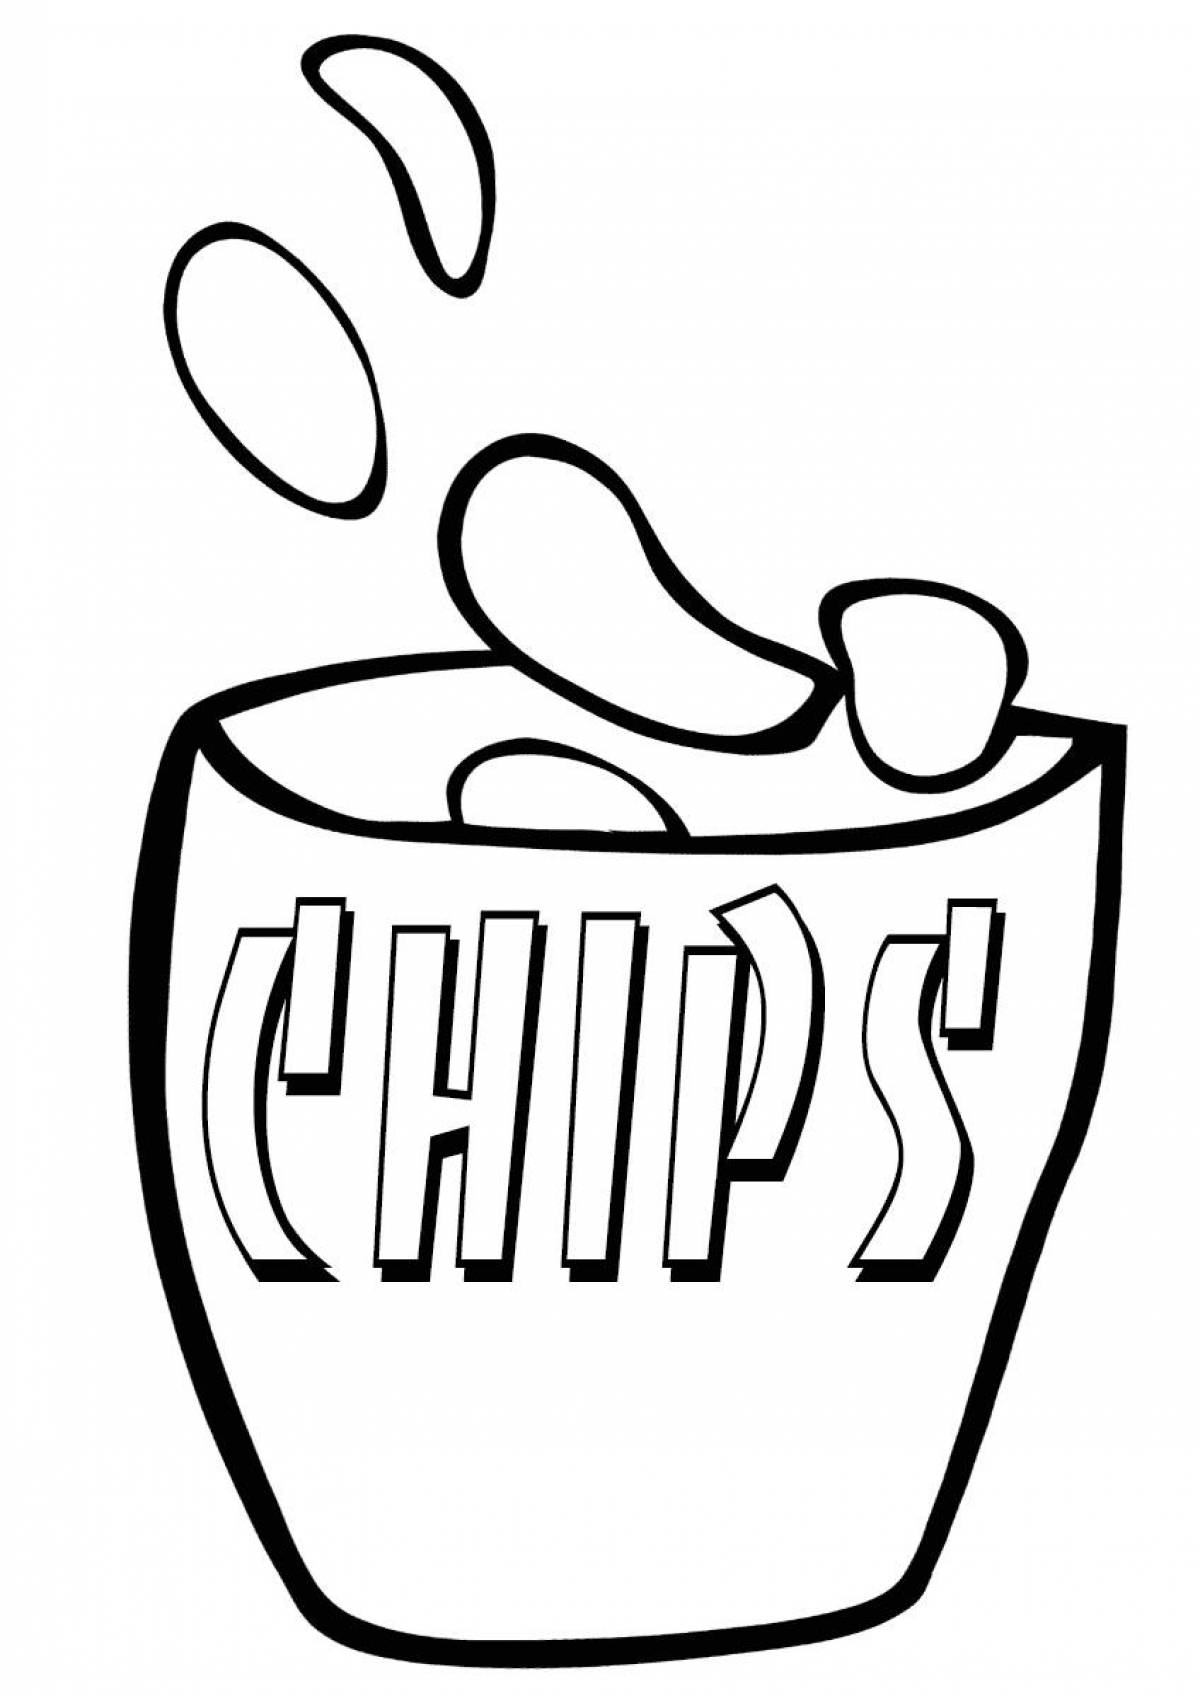 Chips #1